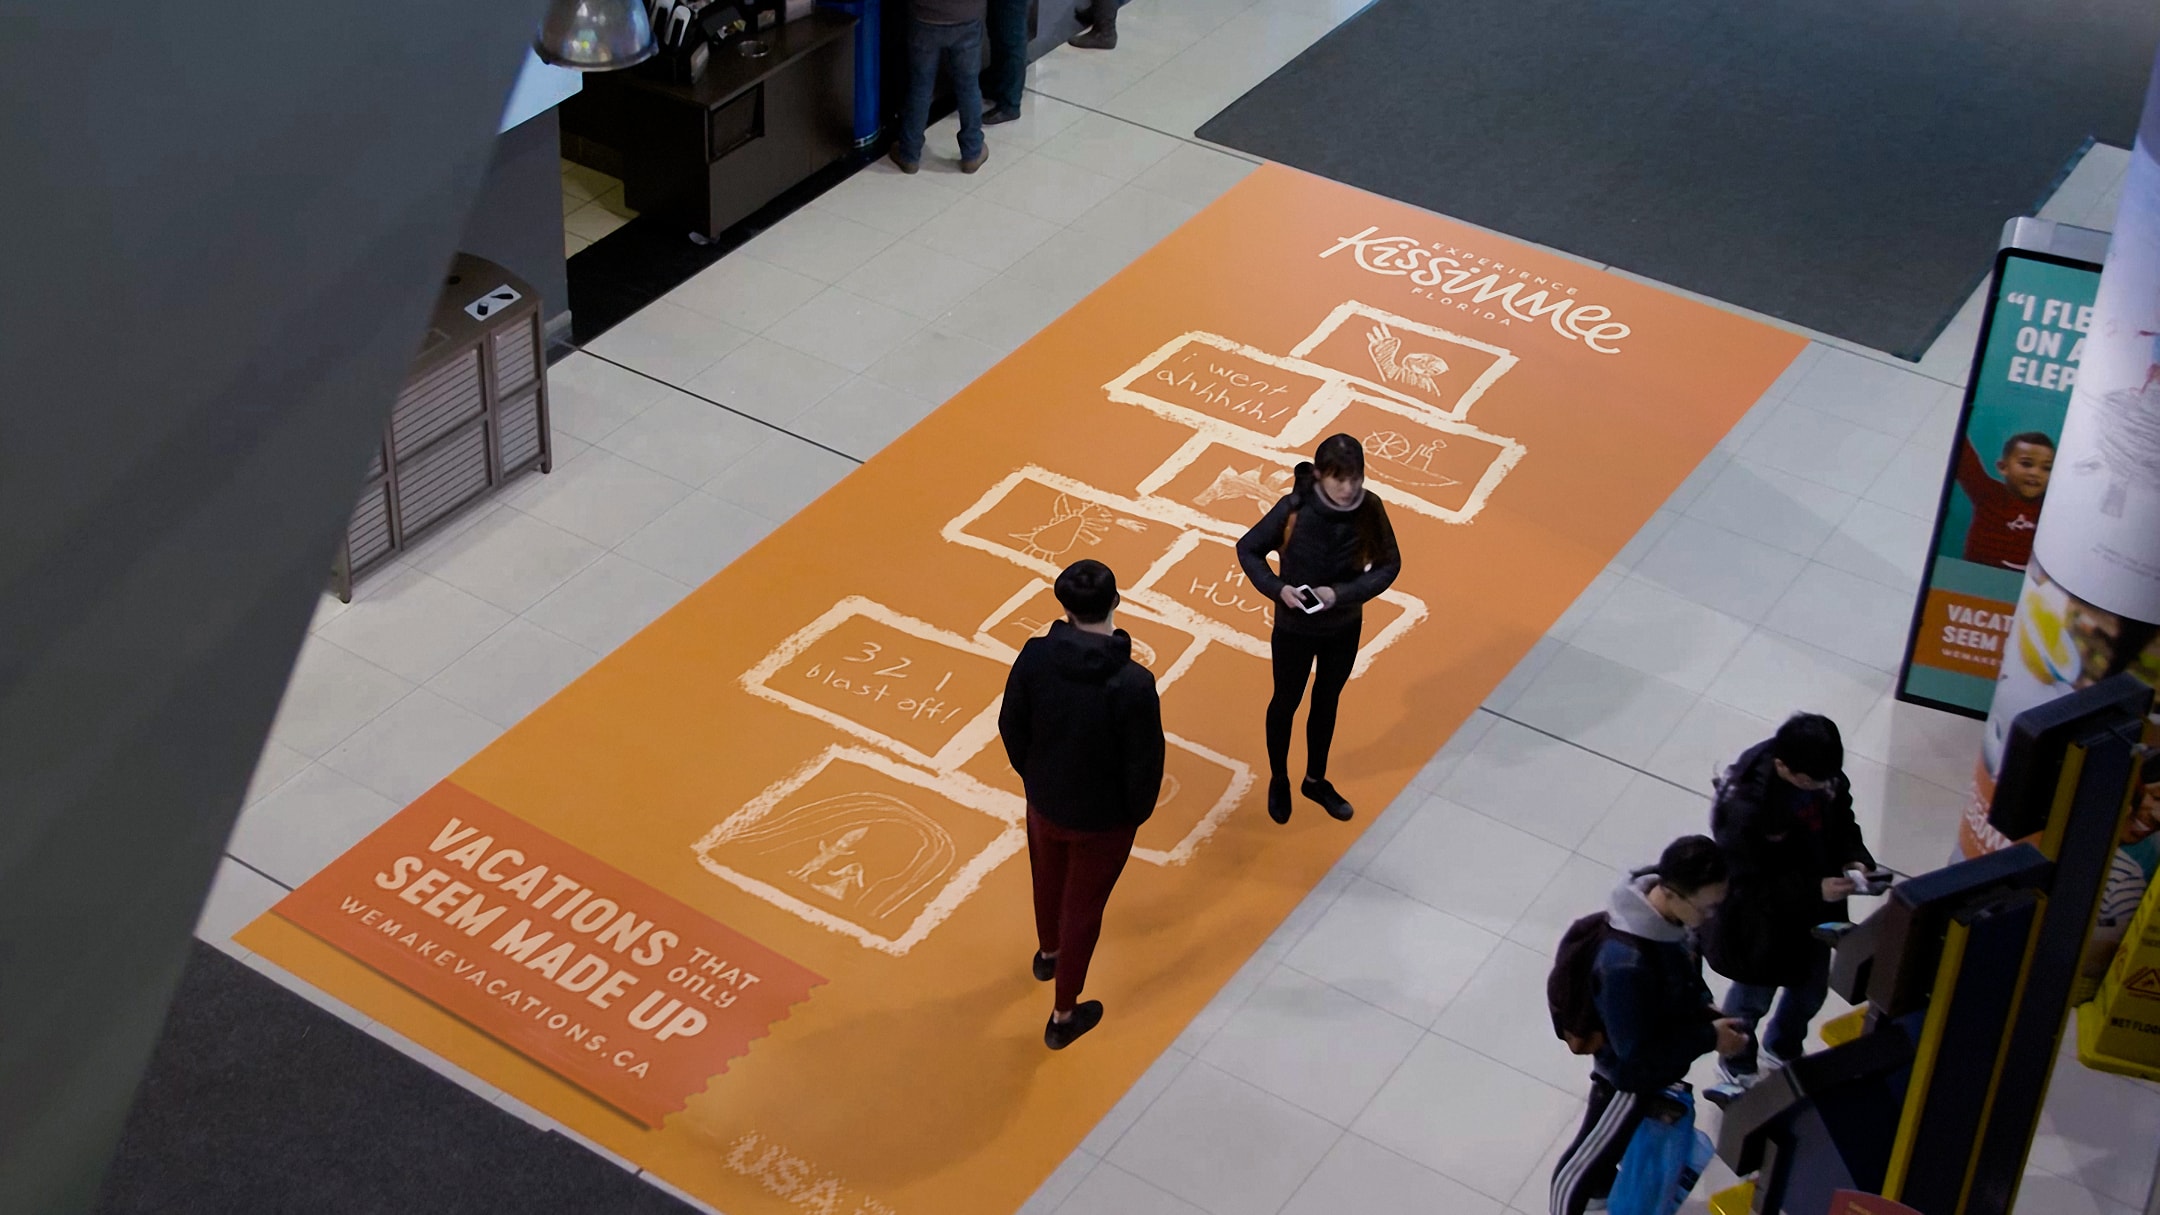 Experience Kissimmee hopscotch ad on mall floor.